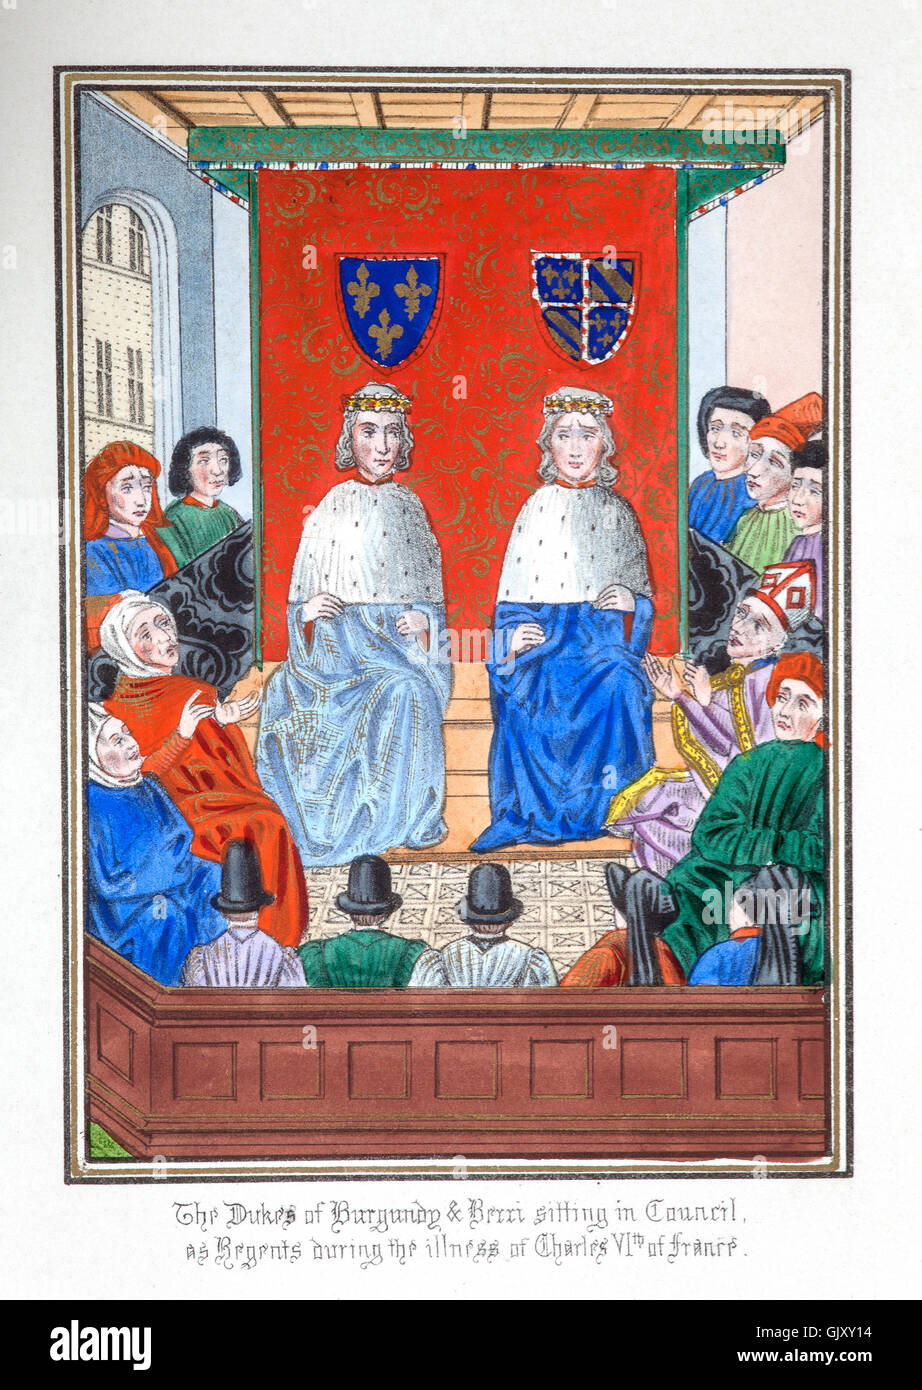 The Dukes of Burgundy and Berri, in council following their appointment as Regents of the Realm following the insanity of King Charles VI in 1393. Stock Photo